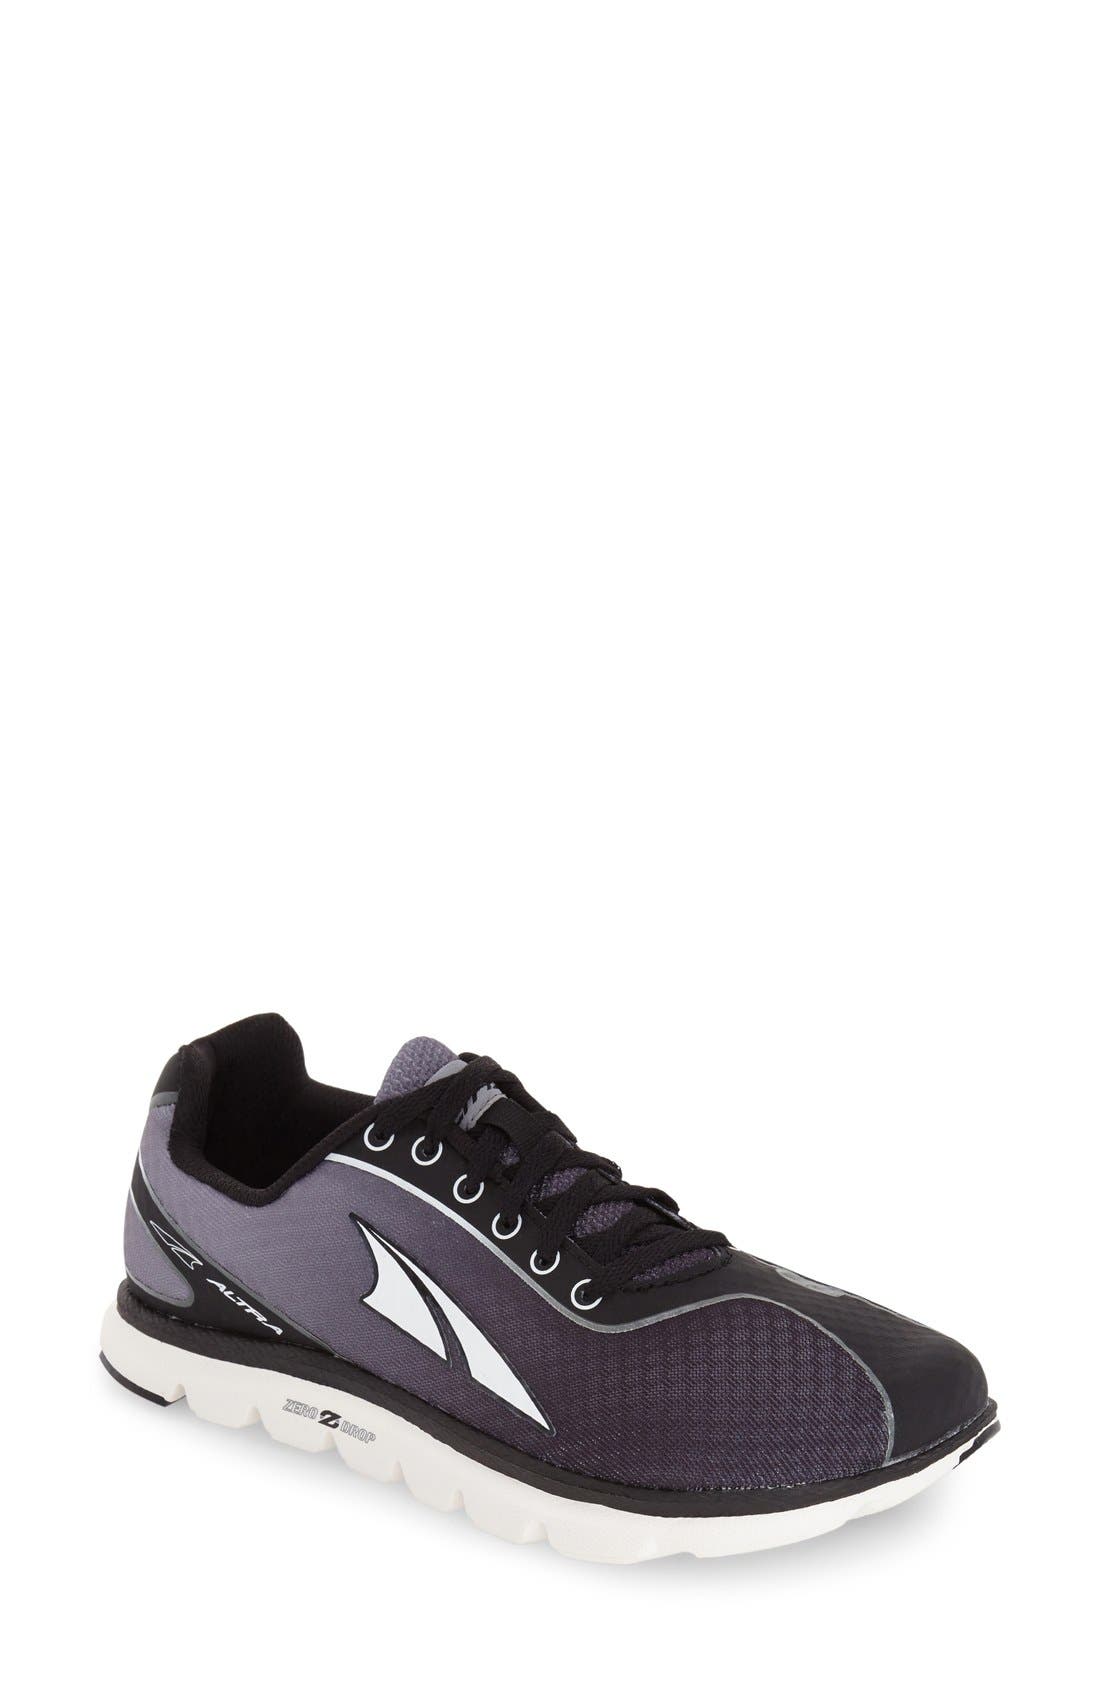 altra one 2.5 womens